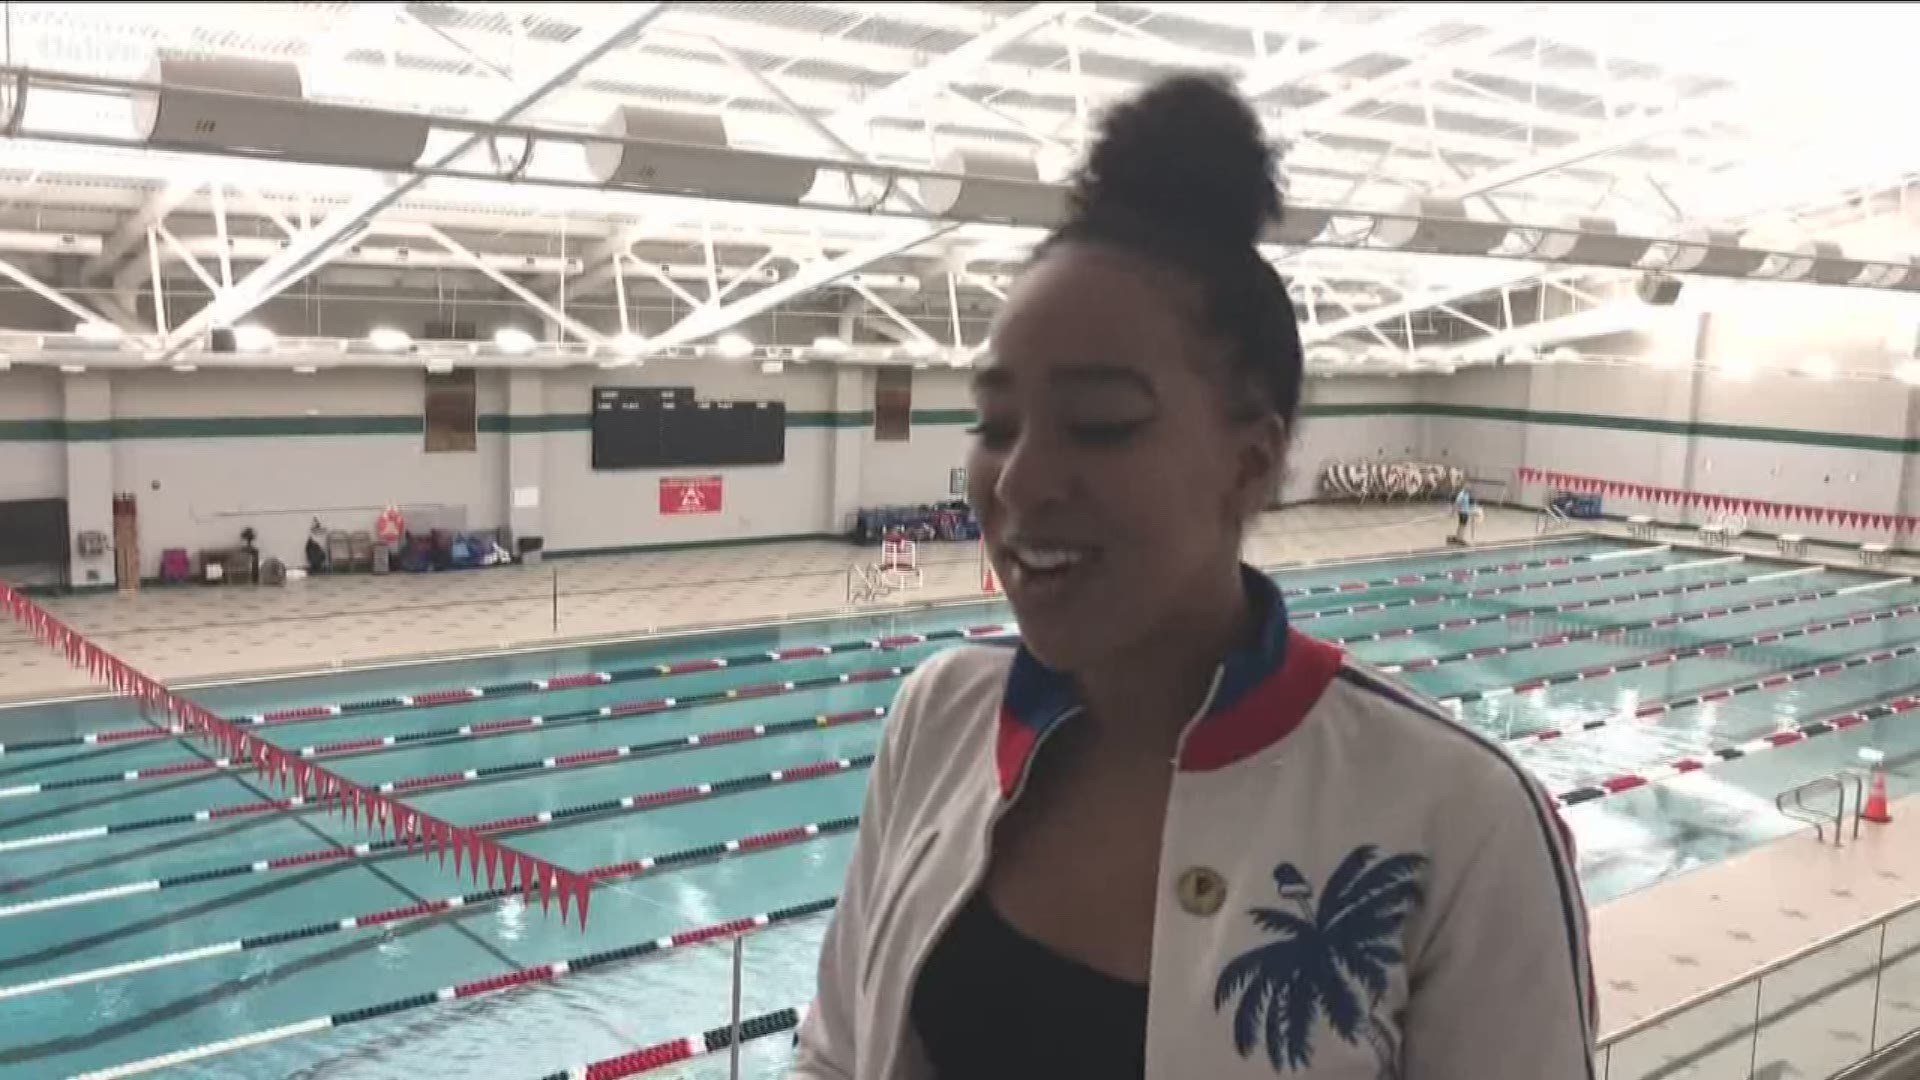 The road to the 2020 Summer Olympics is starting for Naomy Grand’Pierre. The Haitian American swimmer will compete in Tokyo only a year from now. But, much of her training is happening in Atlanta, where here she calls home.